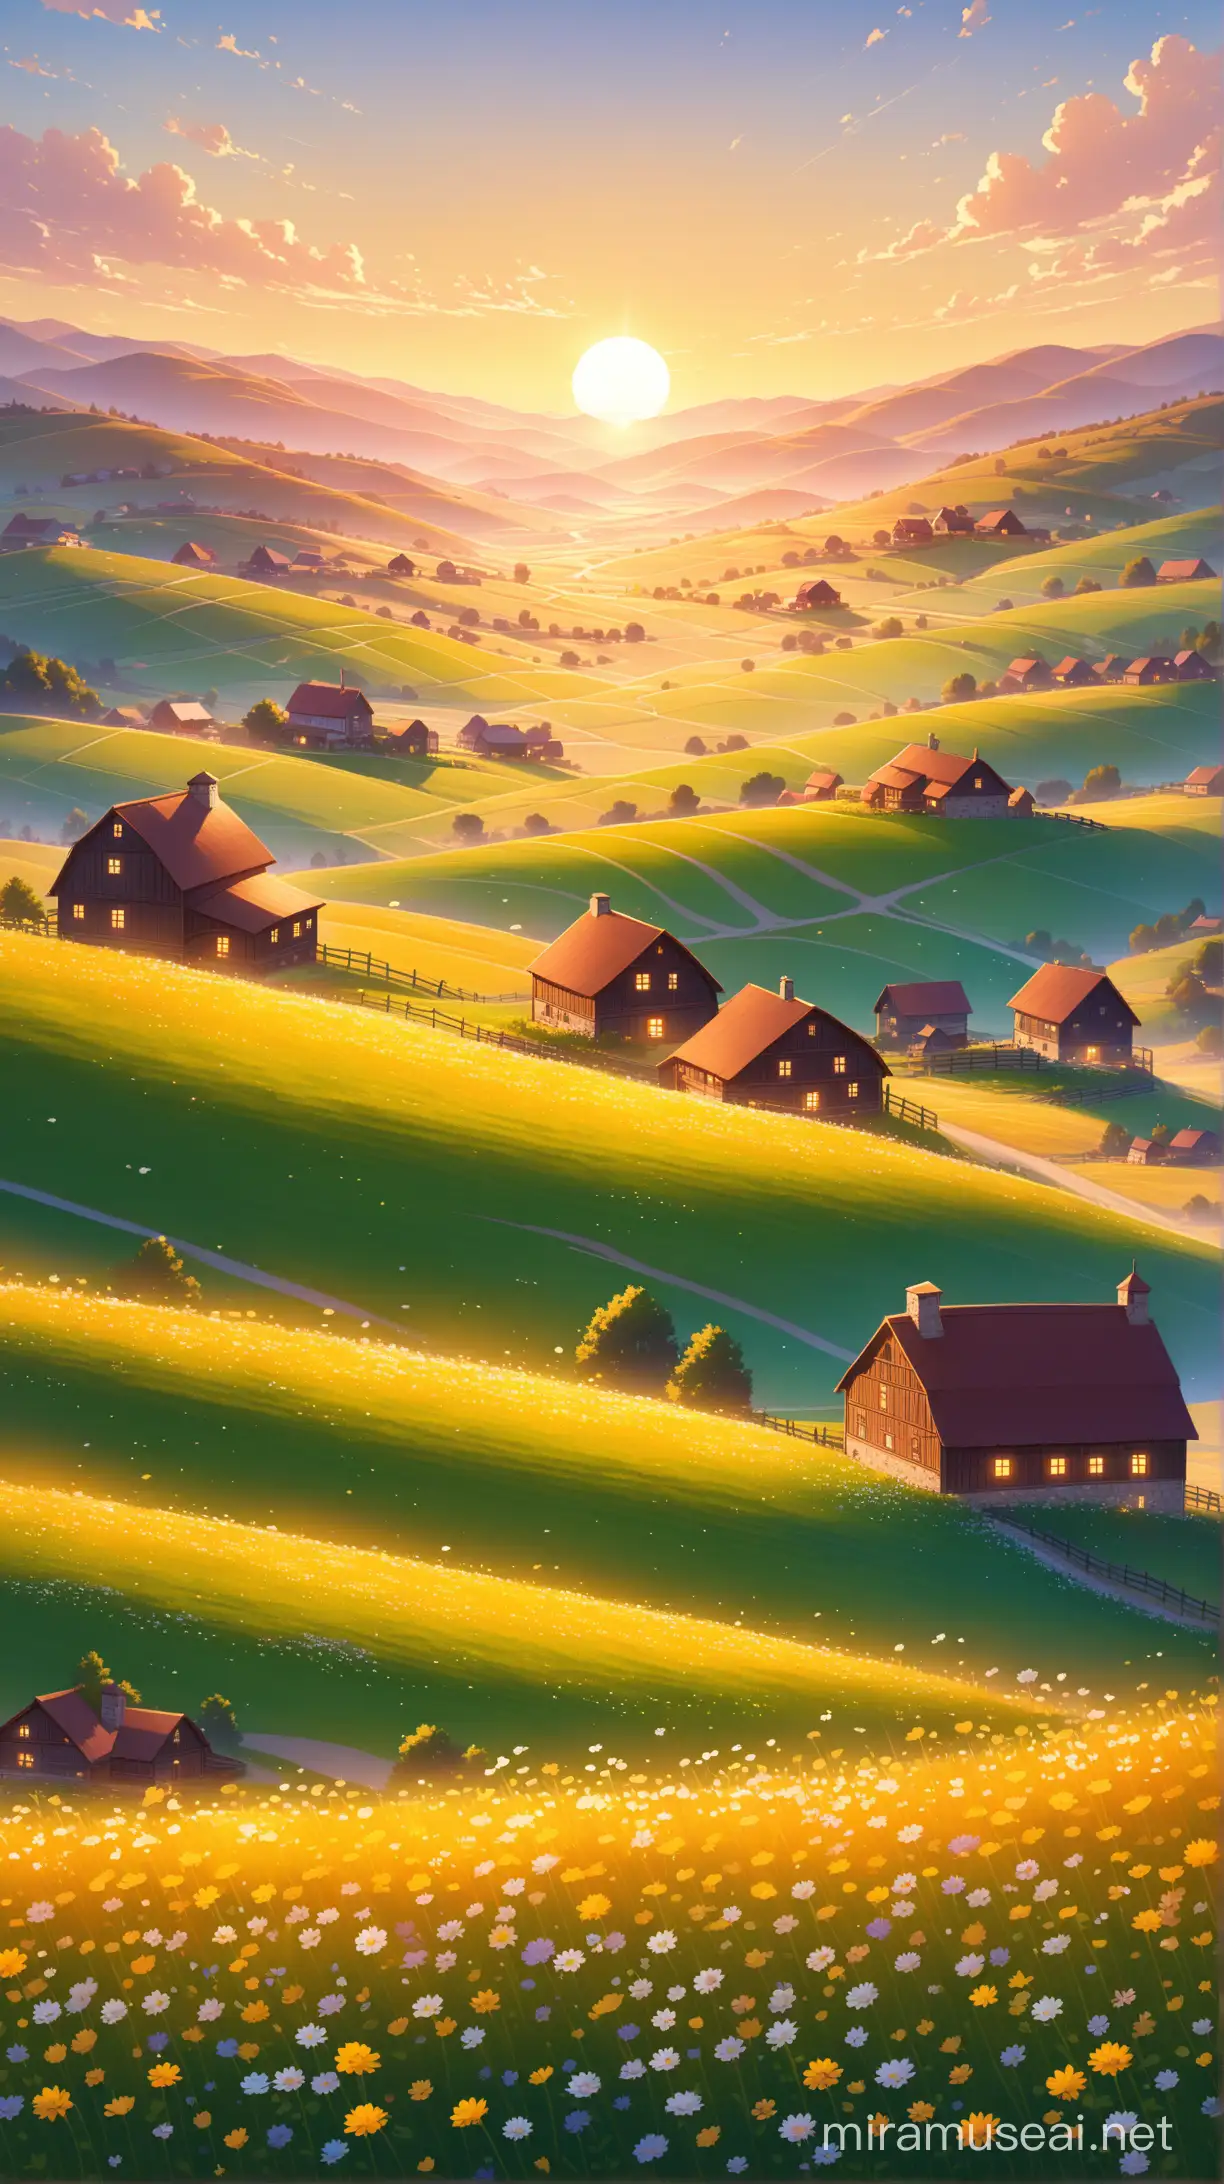 A vast field of wildflowers bathed in the golden light of sunrise. Rolling hills stretch into the distance, dotted with quaint farmhouses. Render in a soft, dreamlike style